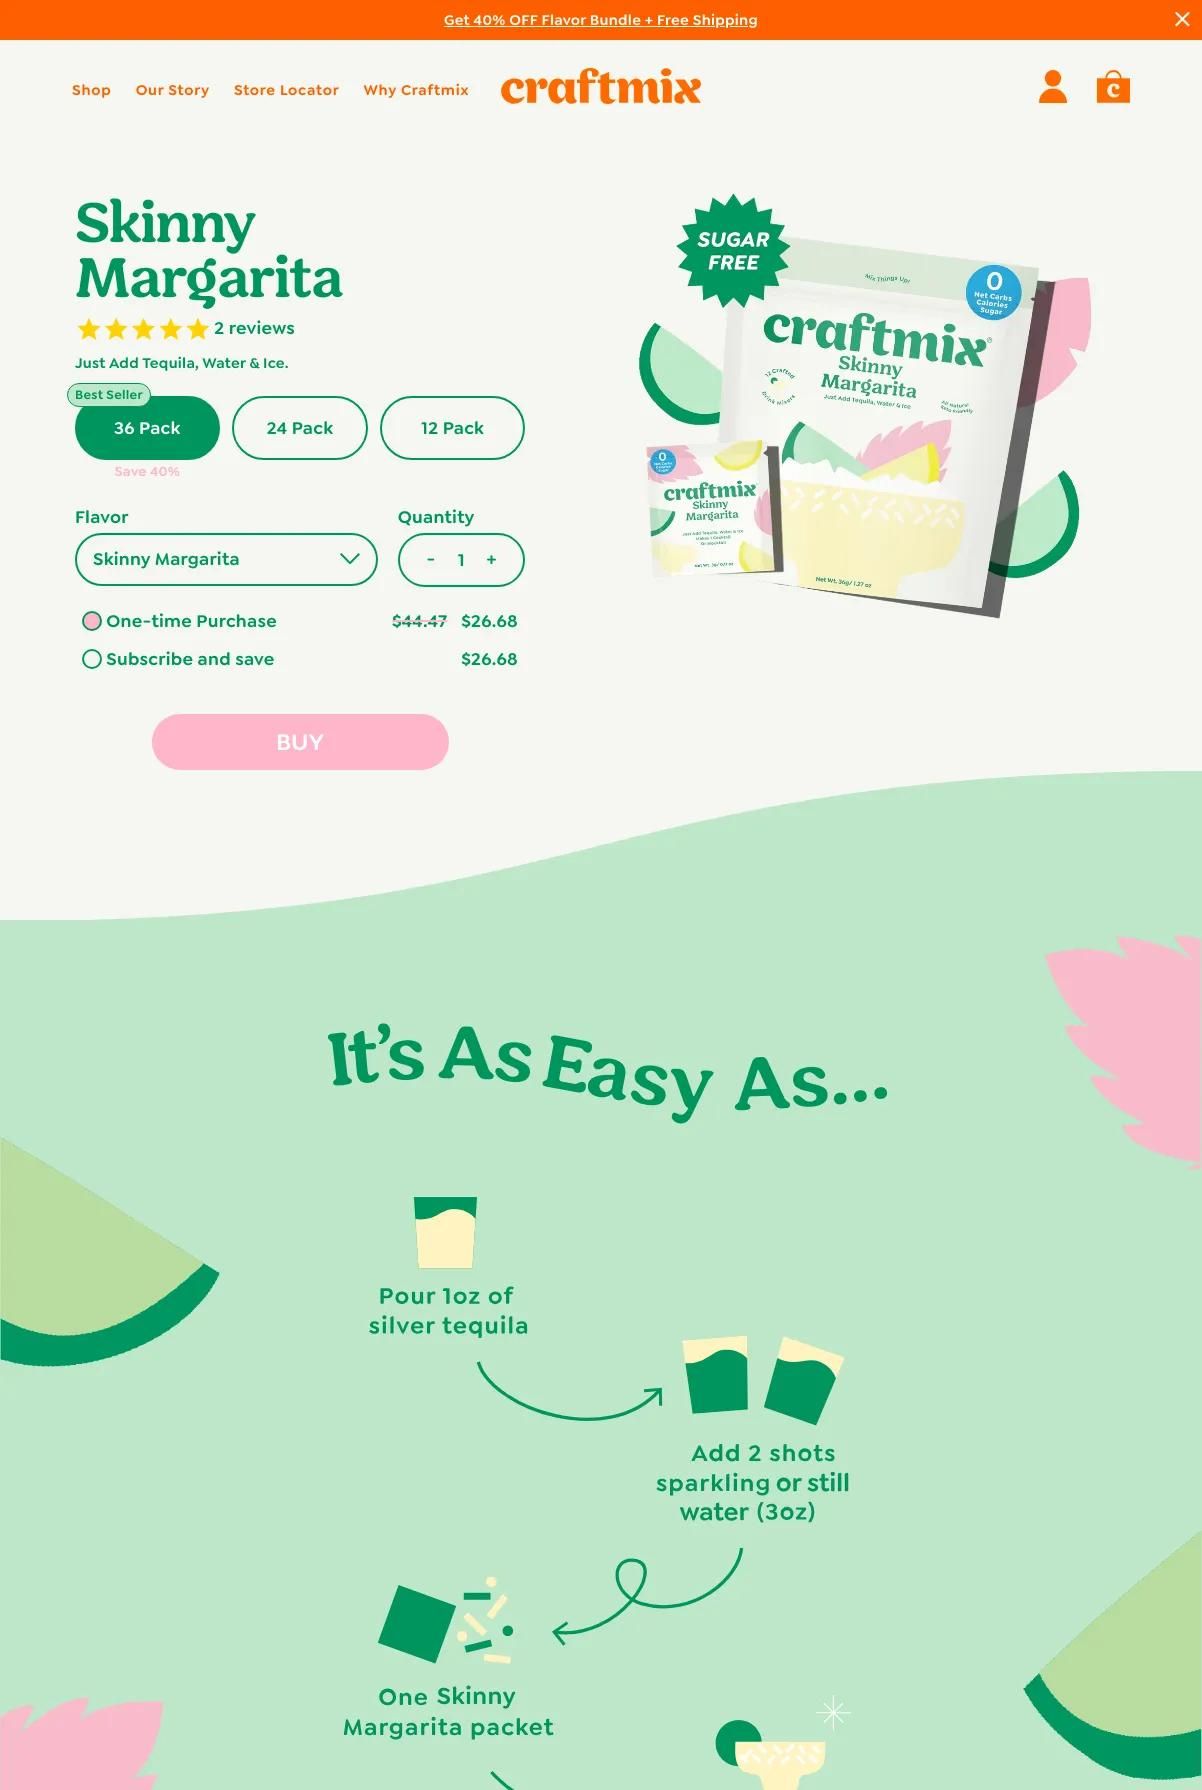 Screenshot 3 of Craftmix (Example Shopify Food and Beverage Website)